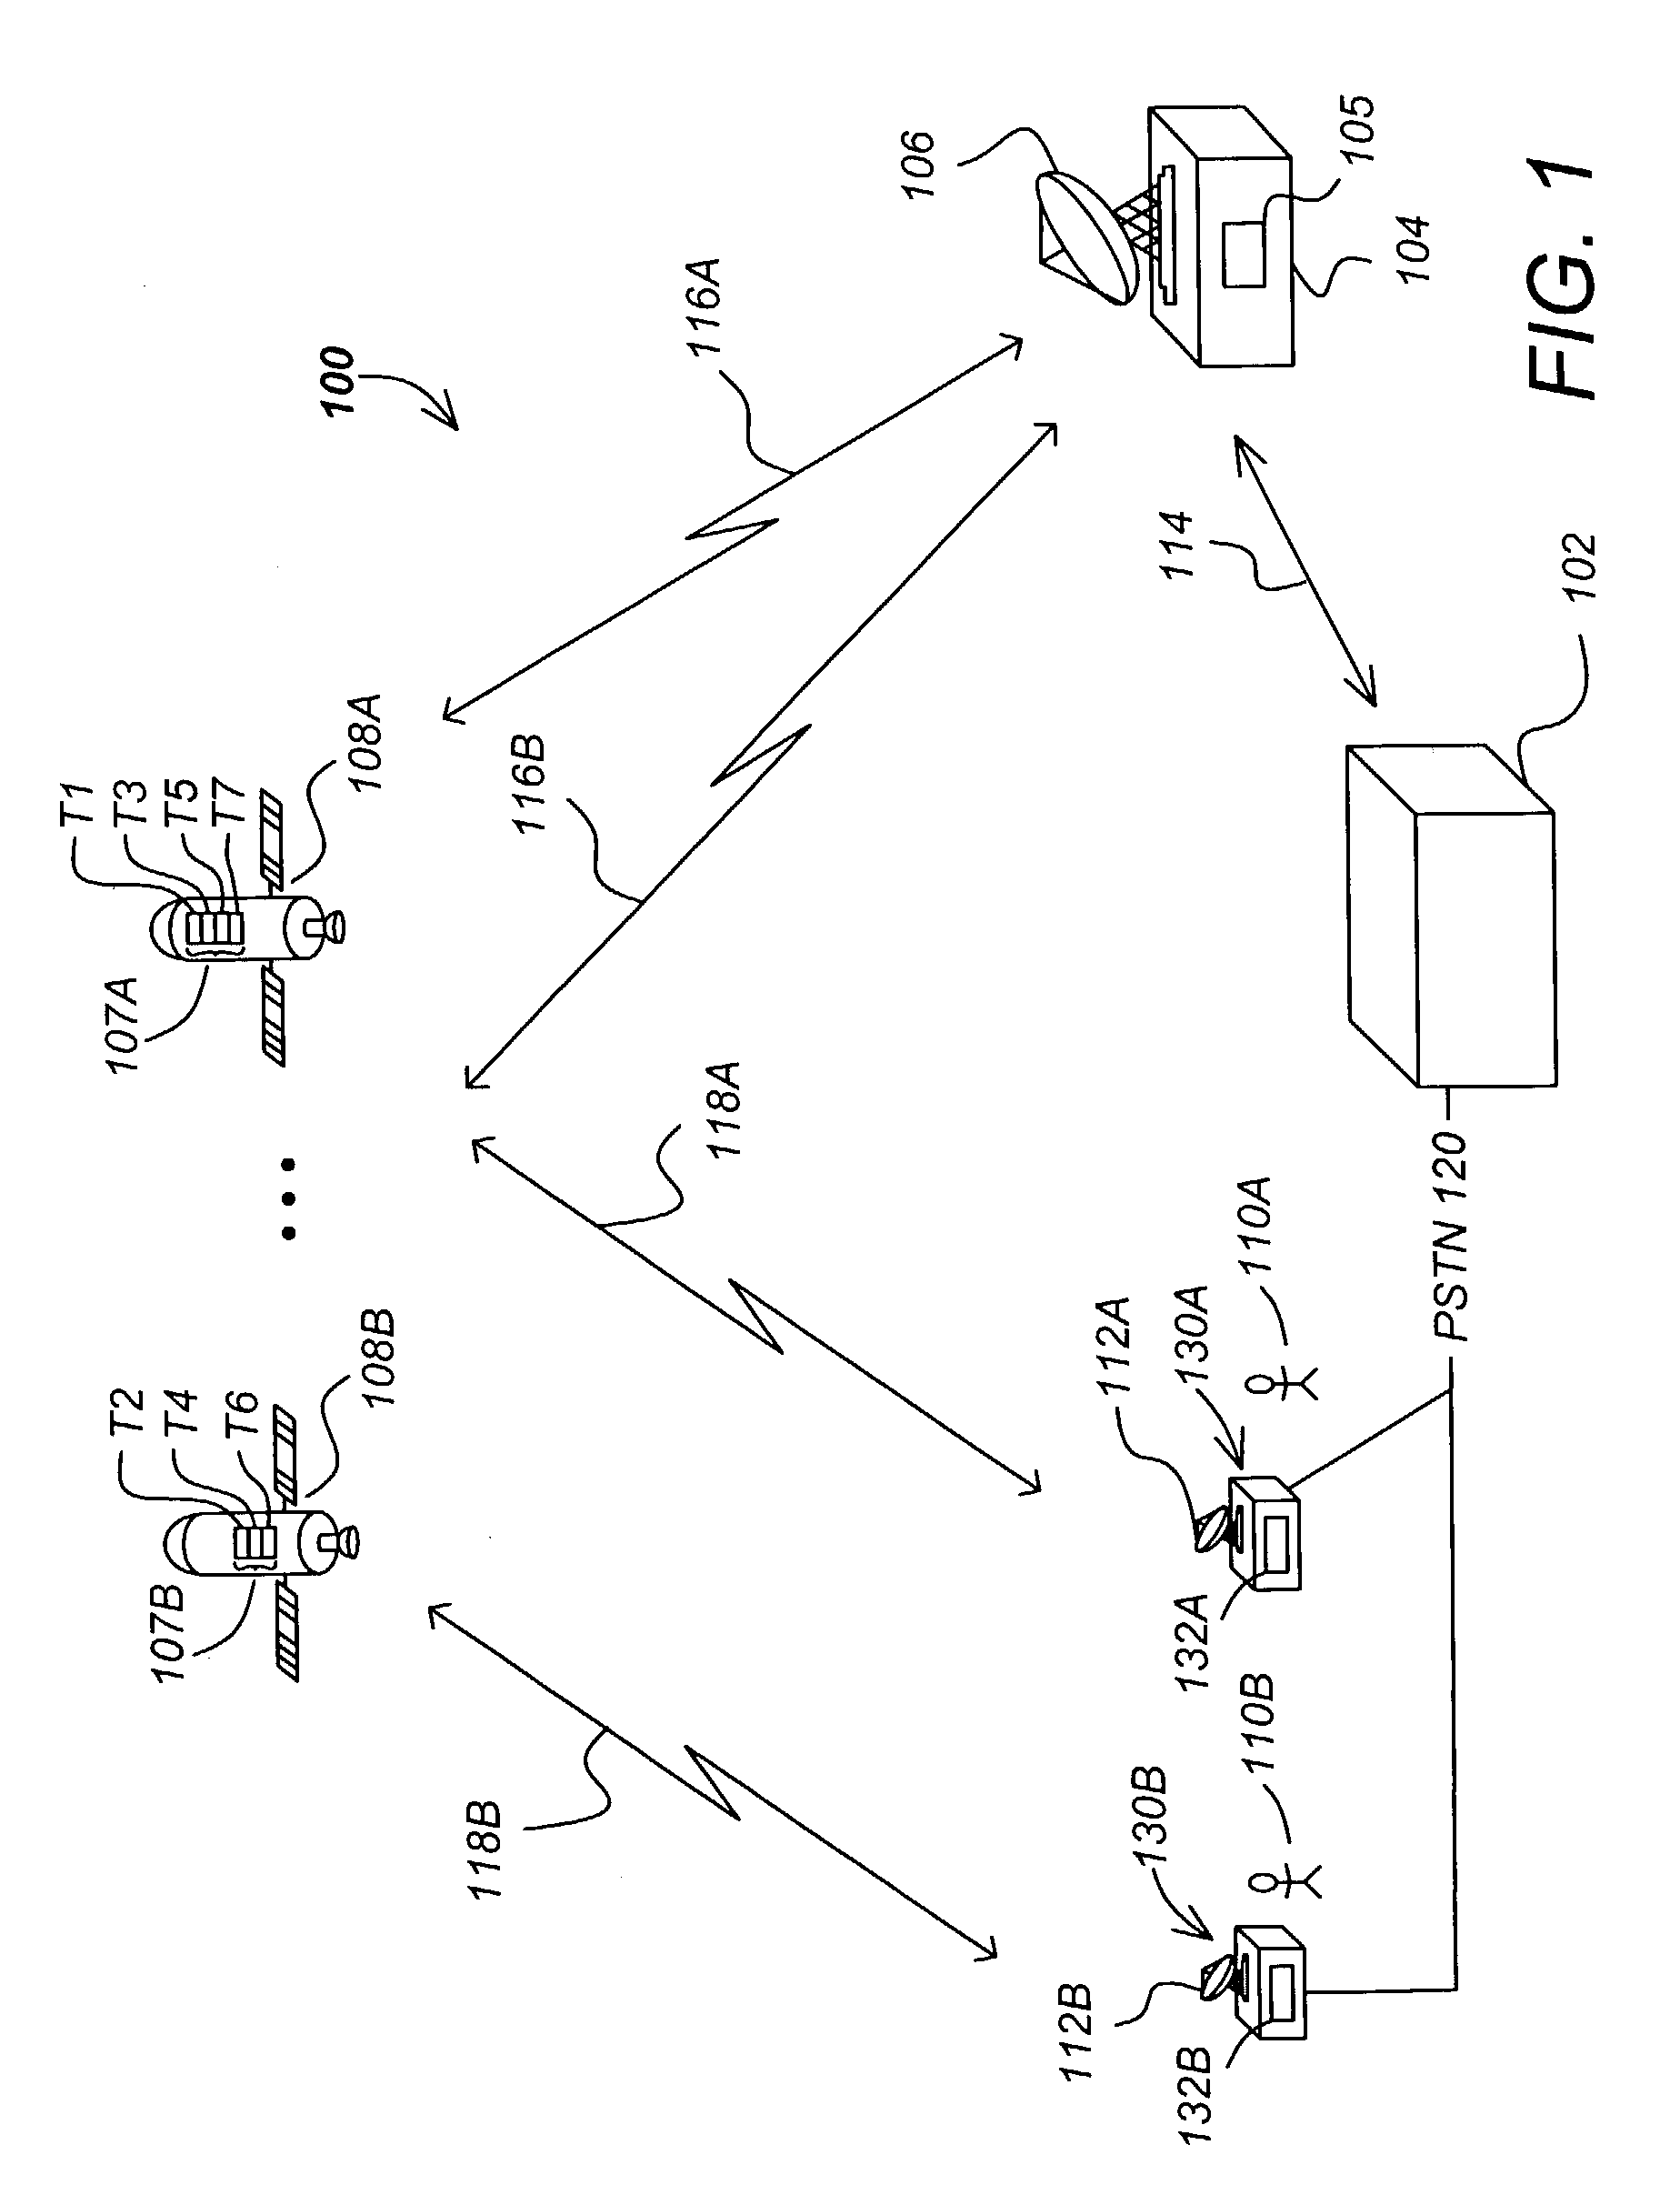 Method and apparatus for reducing interference between terrestrially-based and space-based broadcast systems